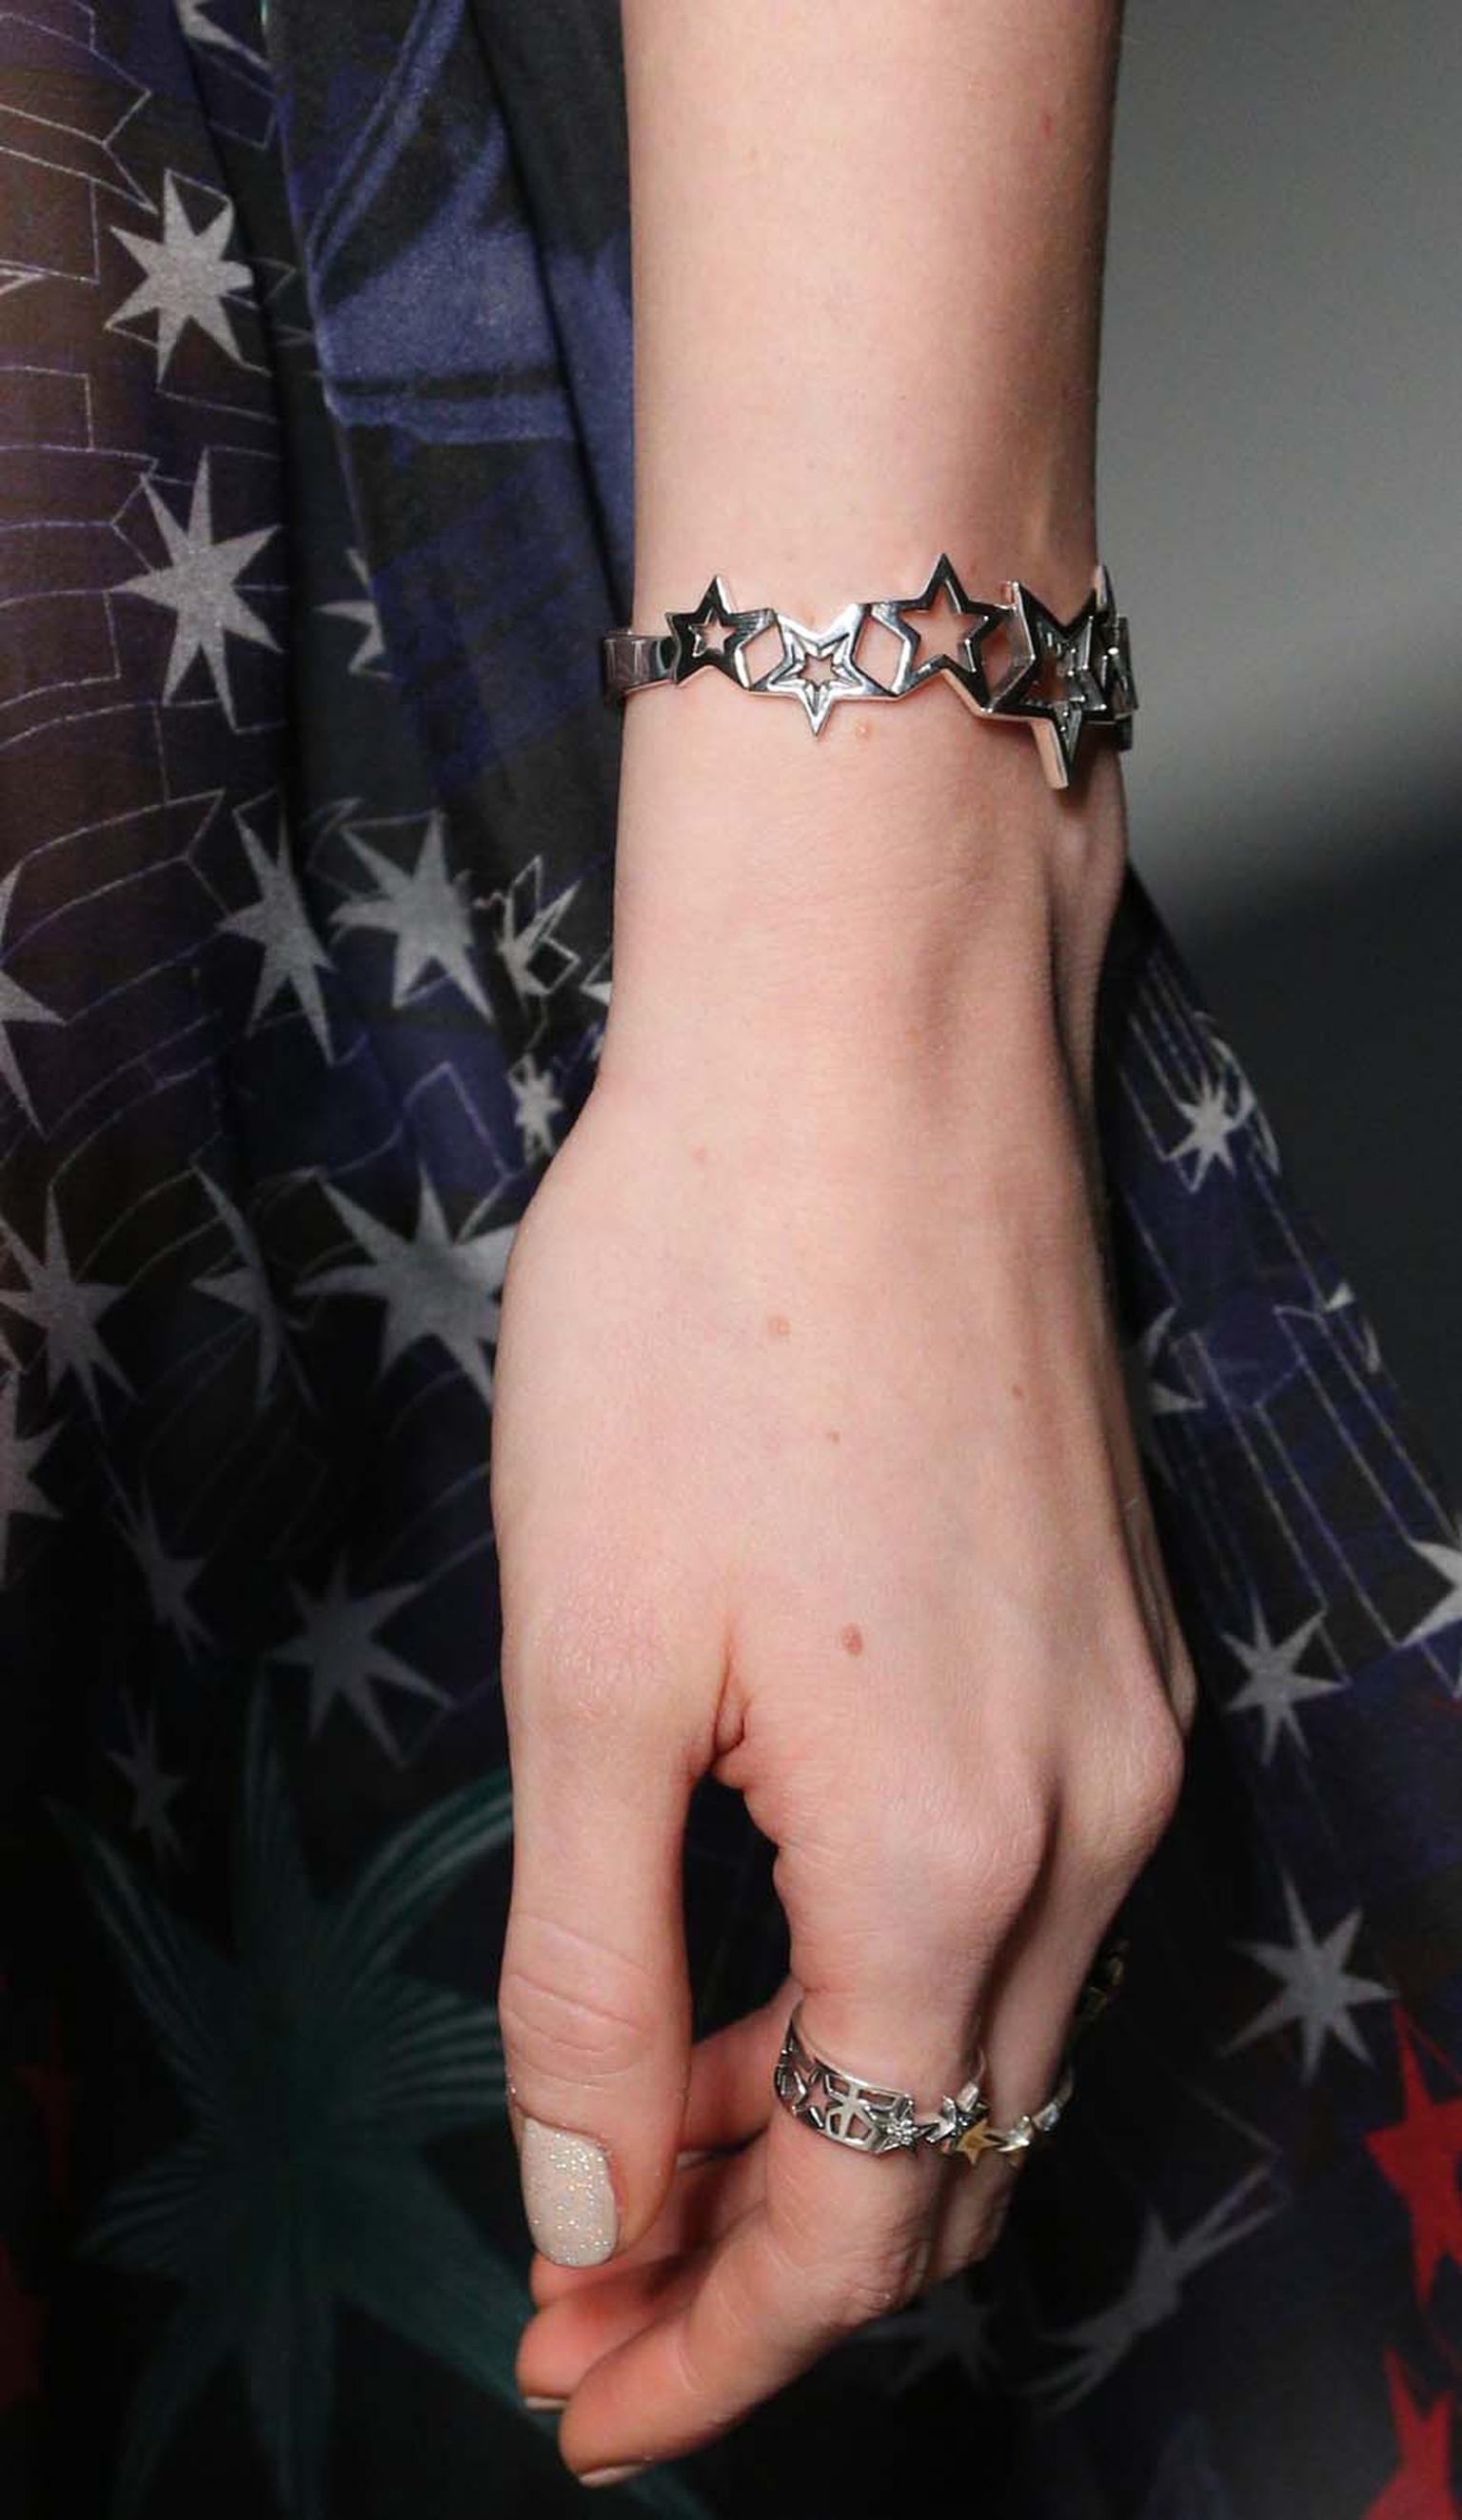 Azza Fahmy for Matthew Williamson sterling silver Stars bracelet and Stars Stack rings.